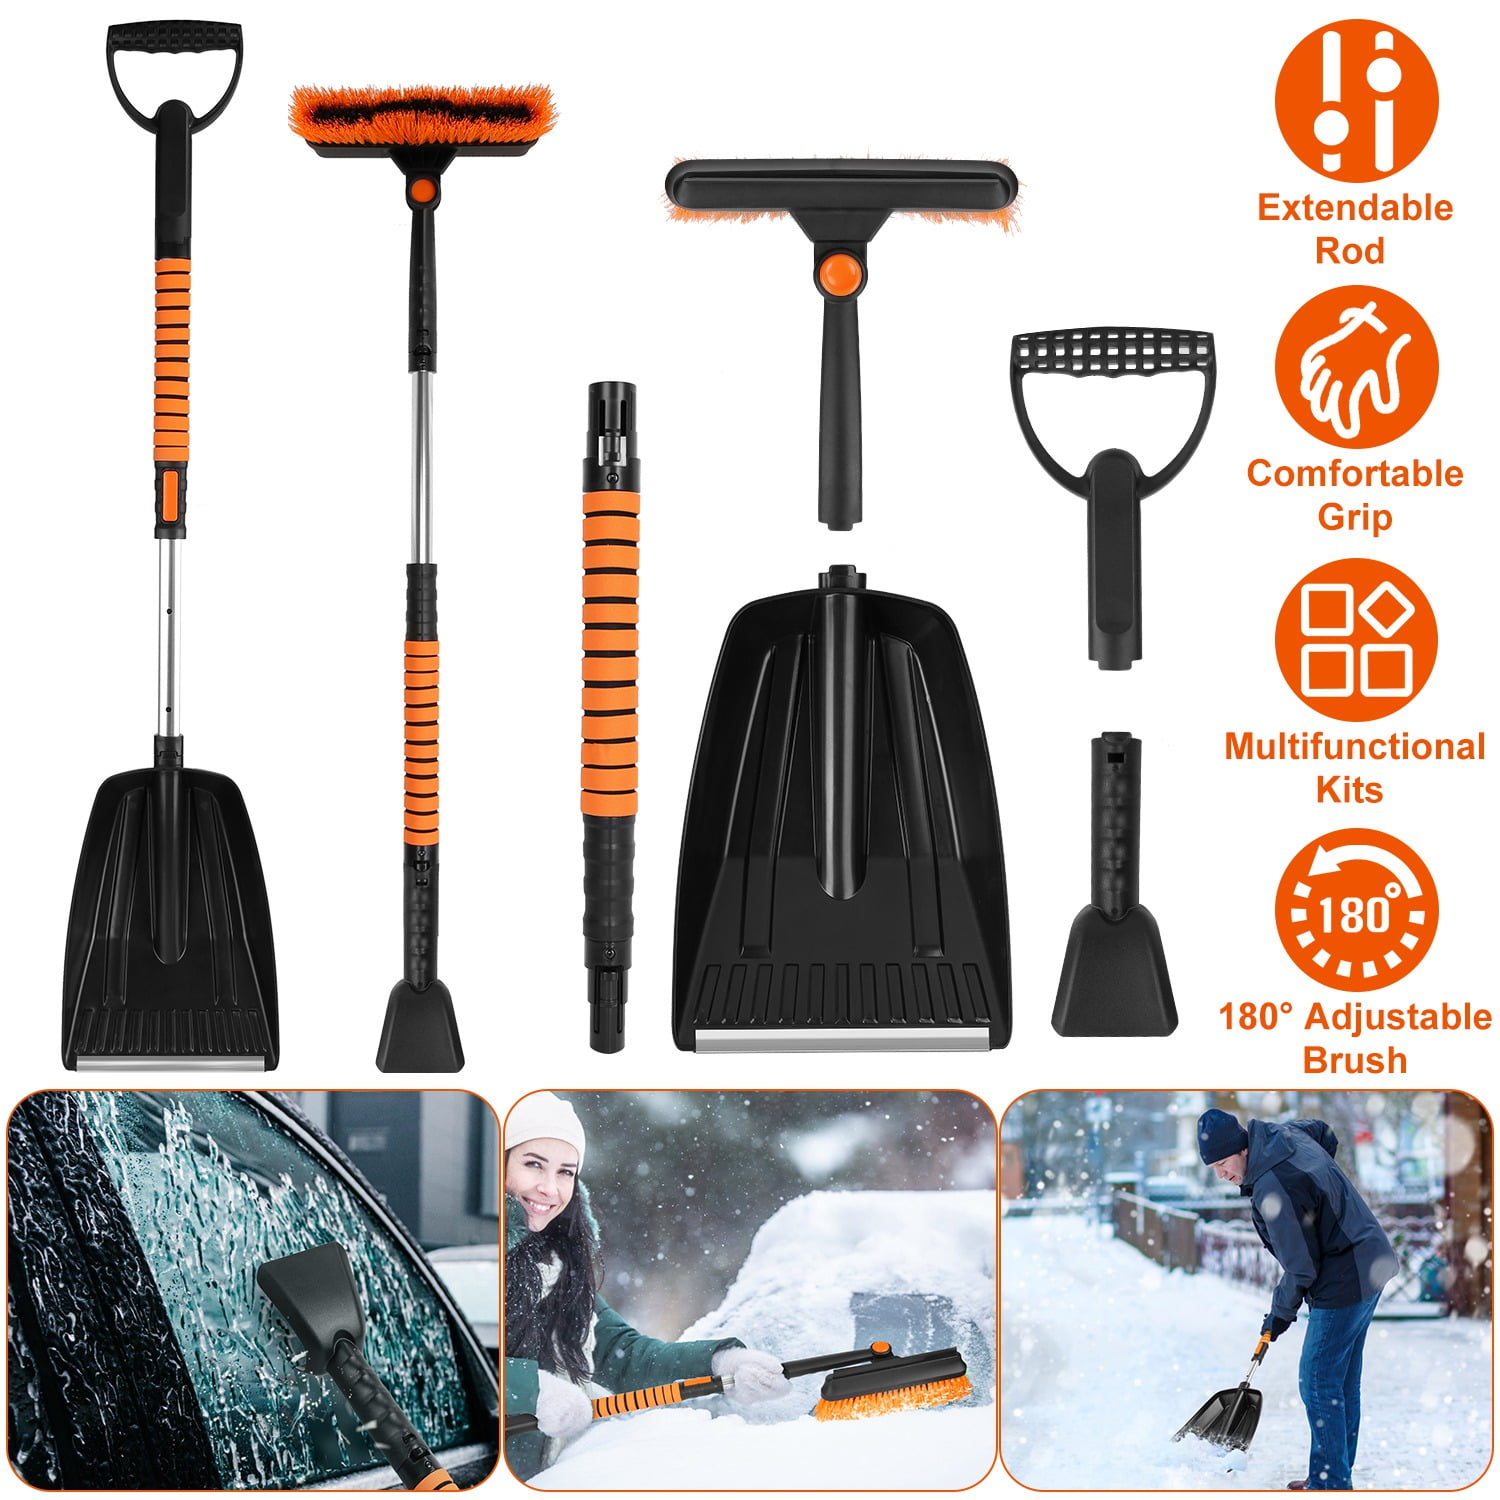 Auto Drive 24 inch Winter Driving Snow Brush and Ice Scraper, Product Size  24 x 4 x 1.4. Blue